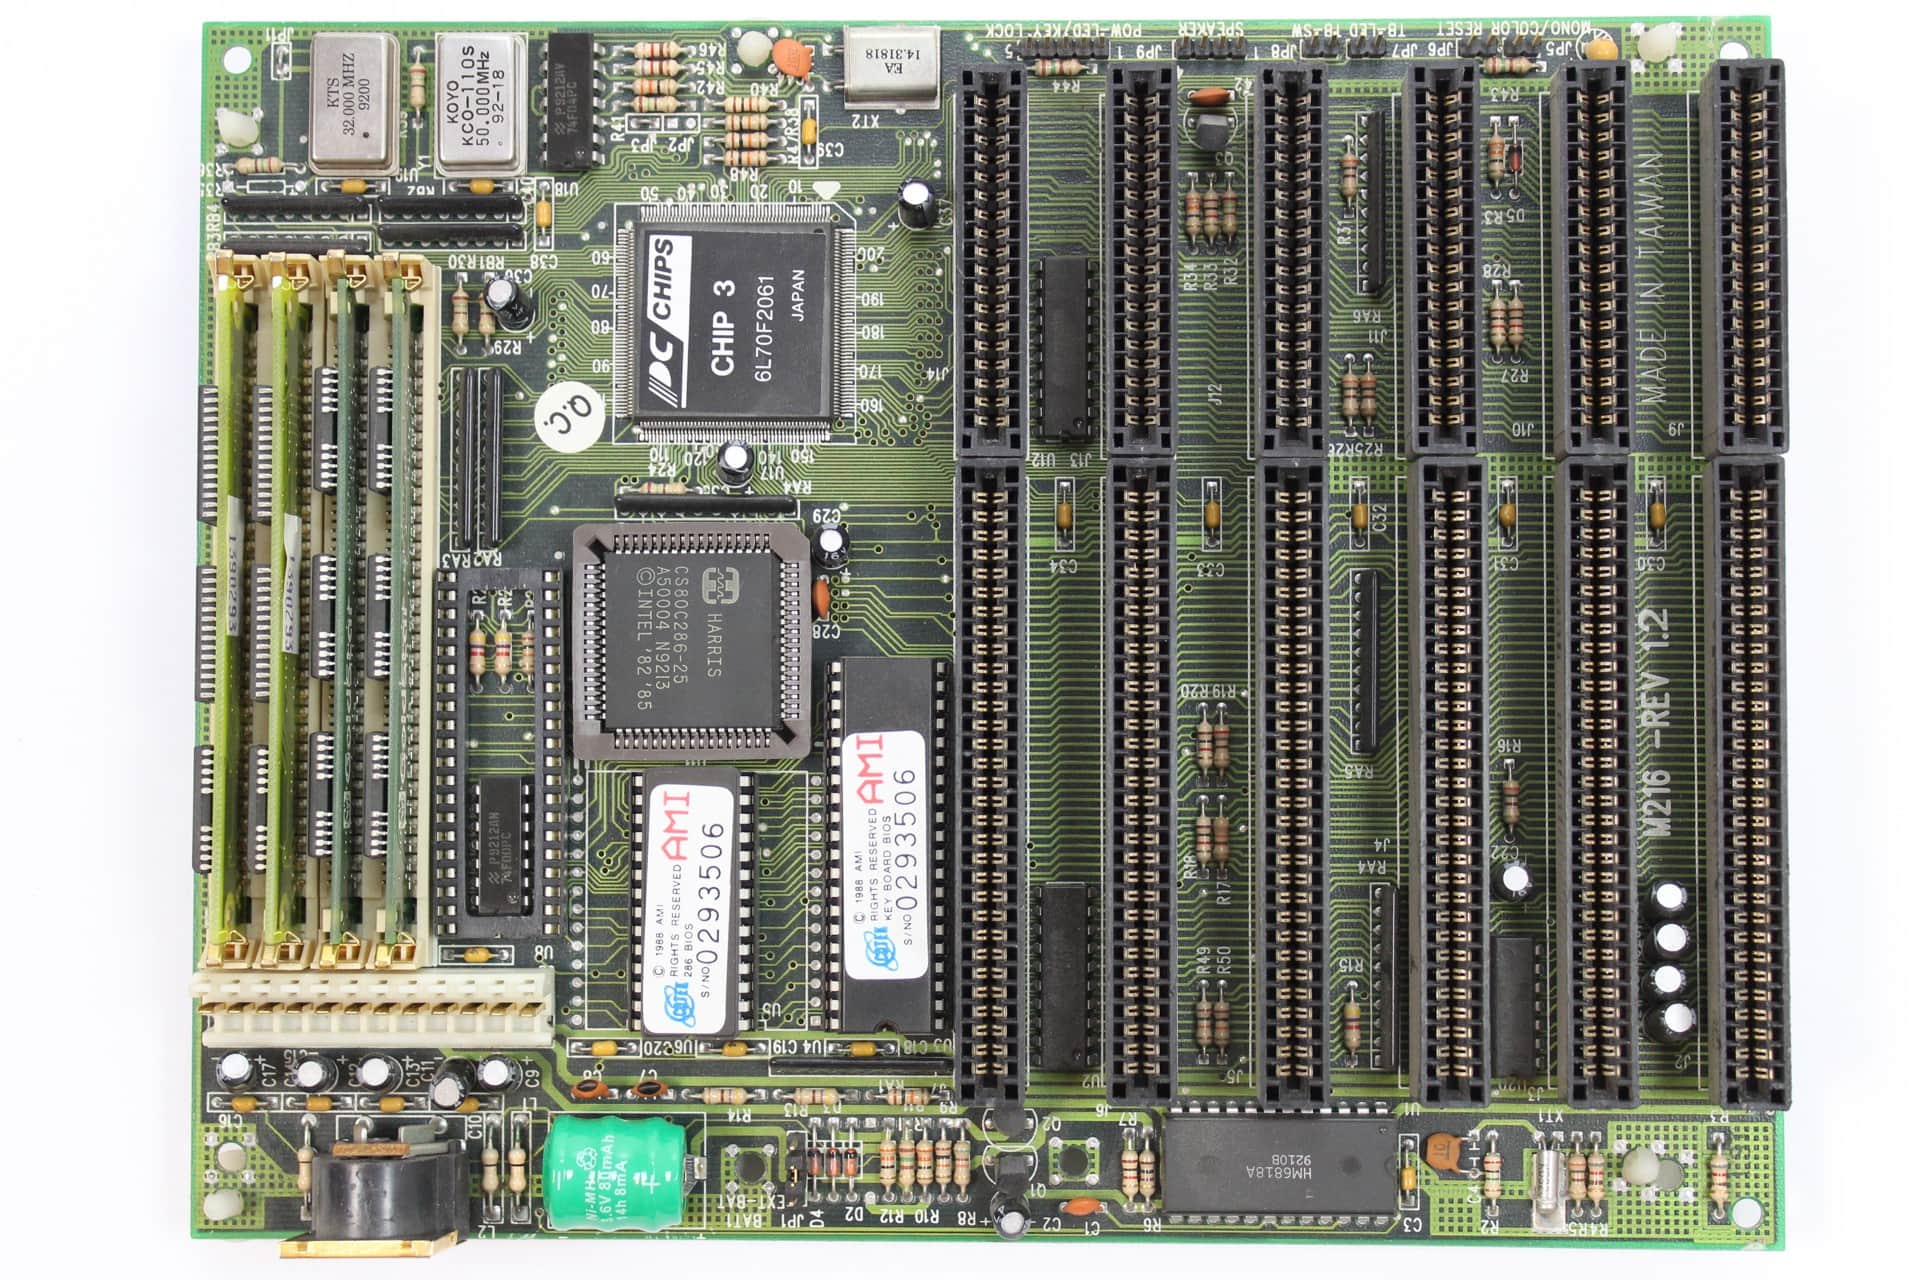 PC Chips M216